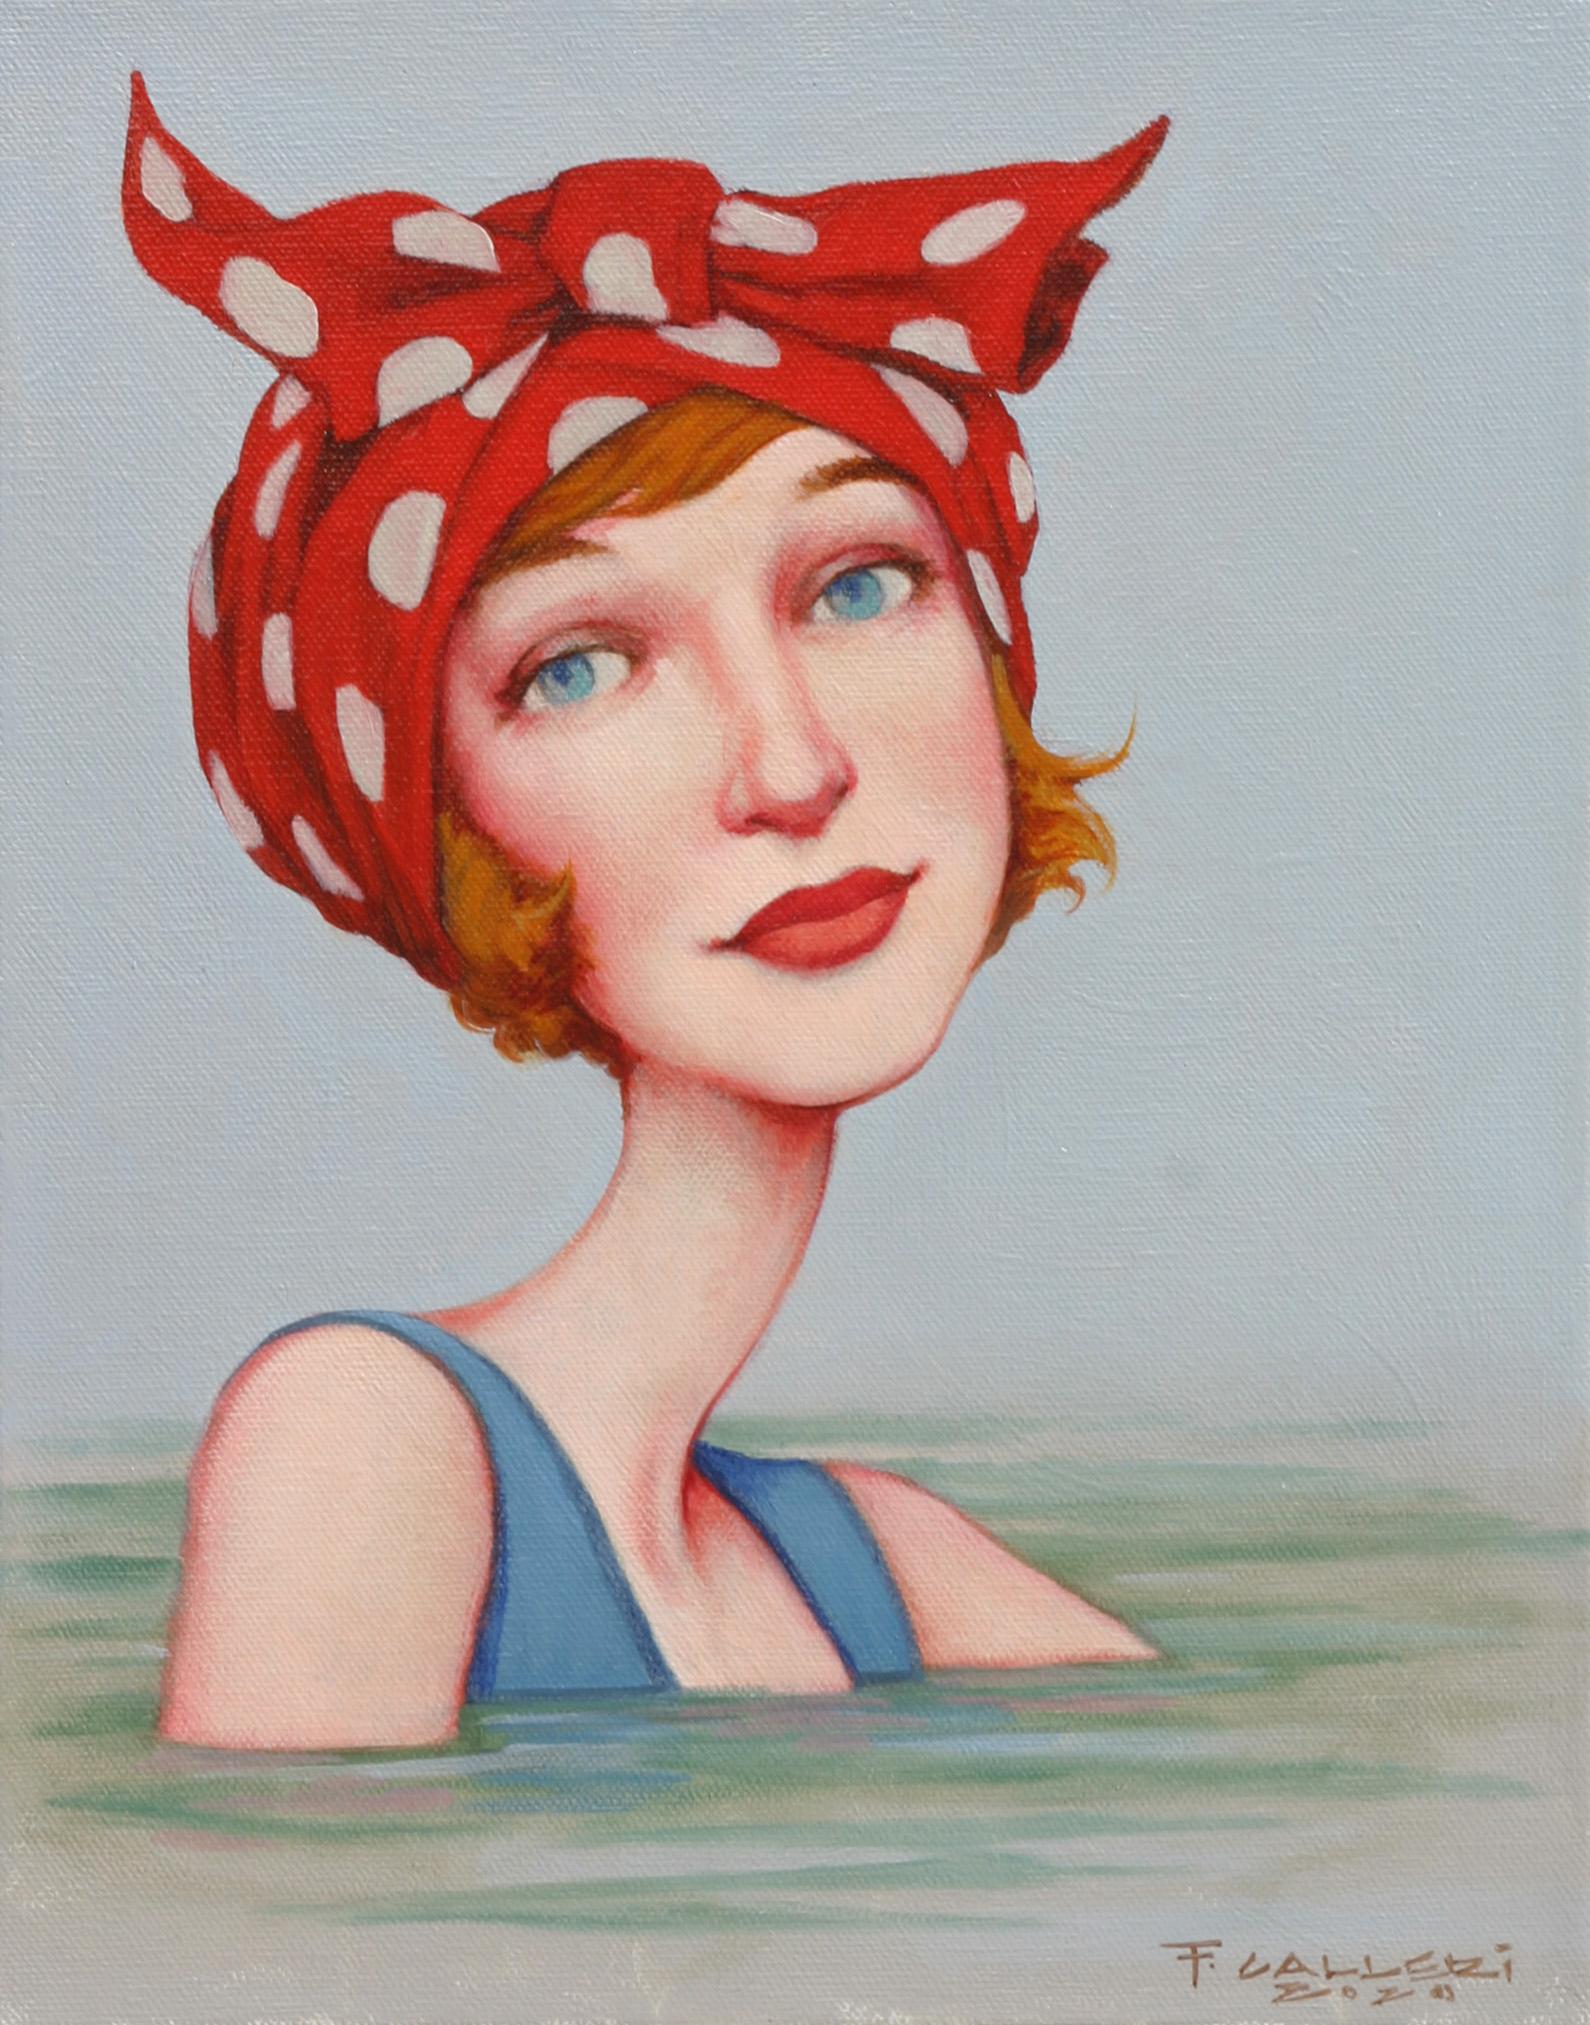 Fred Calleri Portrait Painting - "Dolly Bow" portrait oil painting of woman with red polka dot scarf on her head